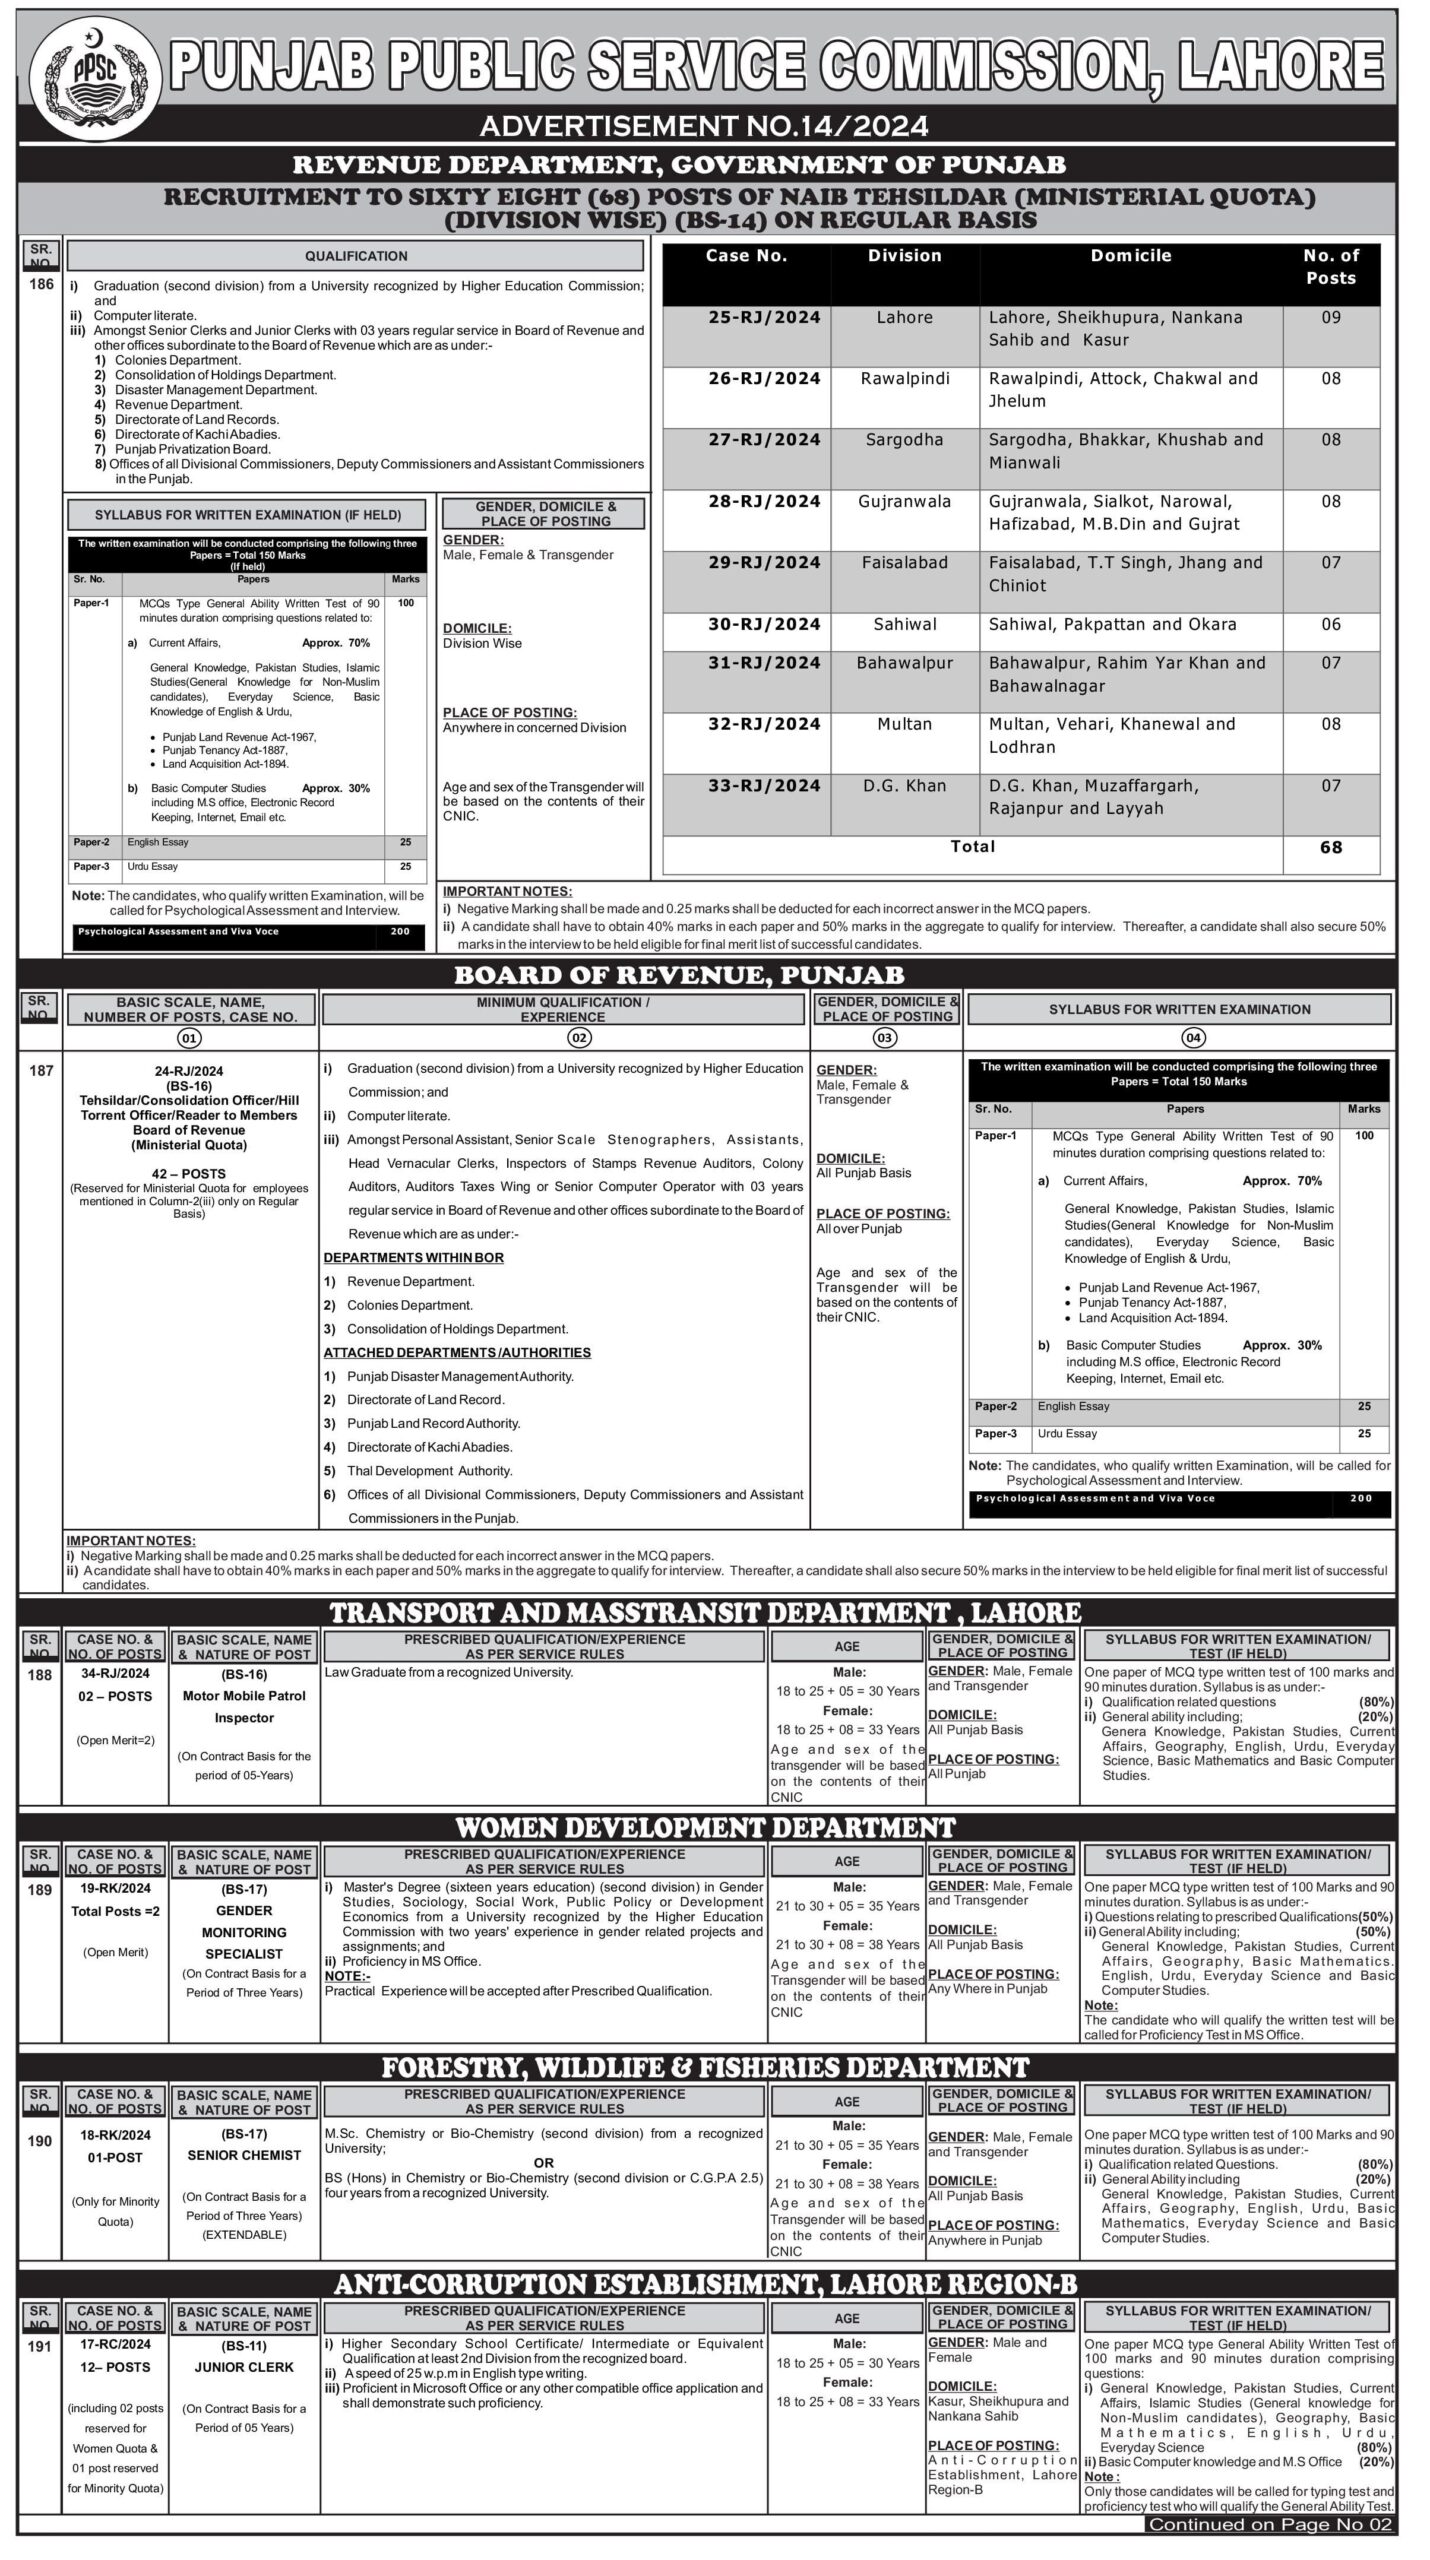 PPSC Jobs Advertisement No 14 - Page 1